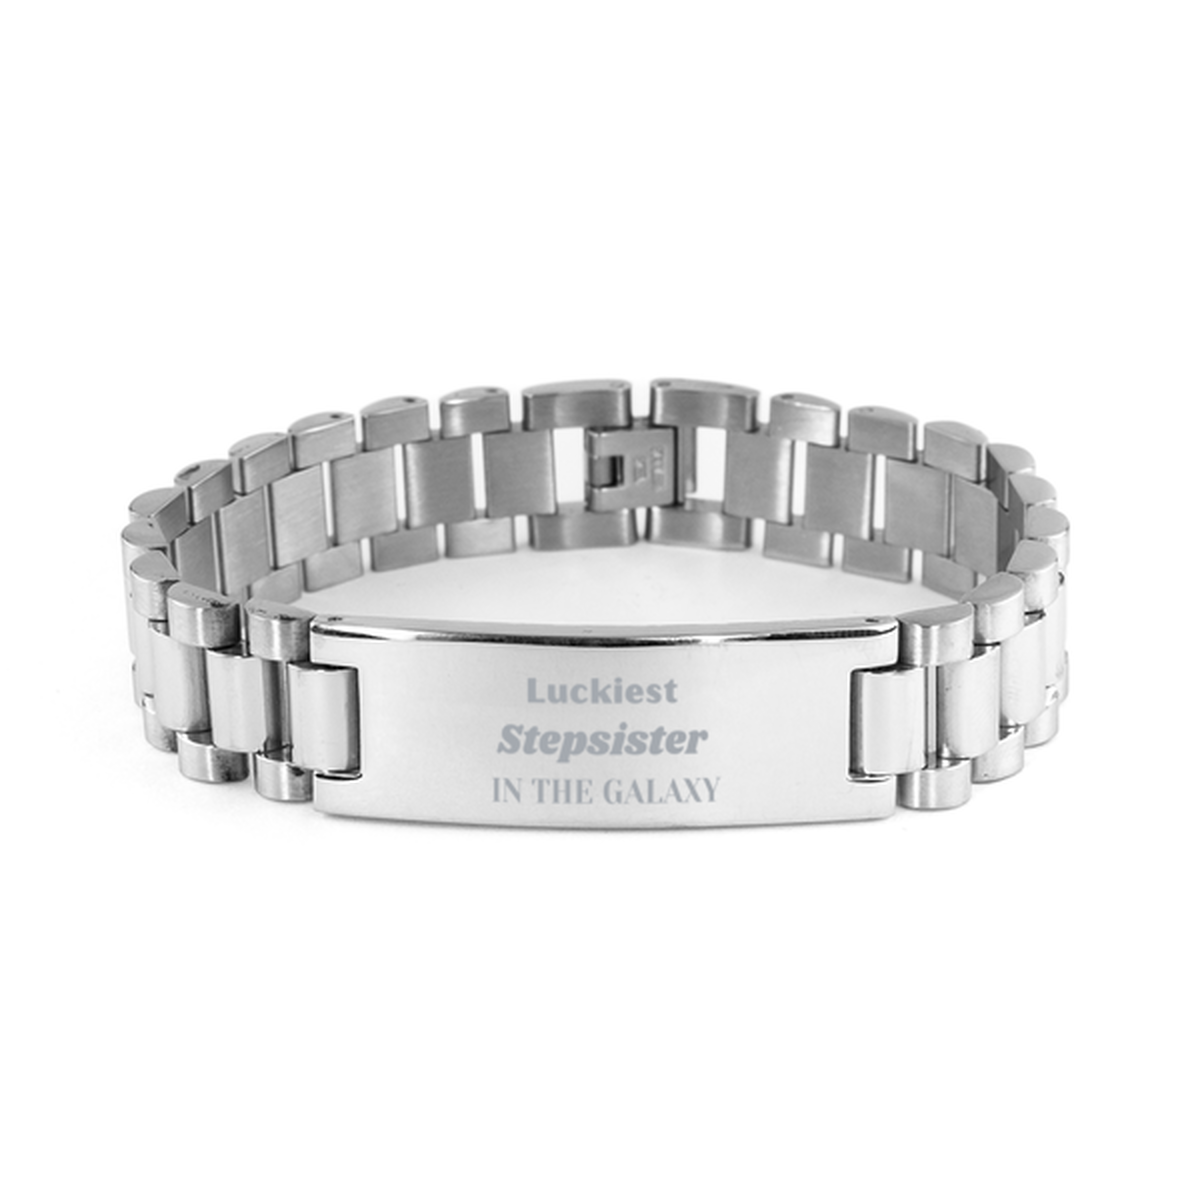 Luckiest Stepsister in the Galaxy, To My Stepsister Engraved Gifts, Christmas Stepsister Ladder Stainless Steel Bracelet Gifts, X-mas Birthday Unique Gifts For Stepsister Men Women